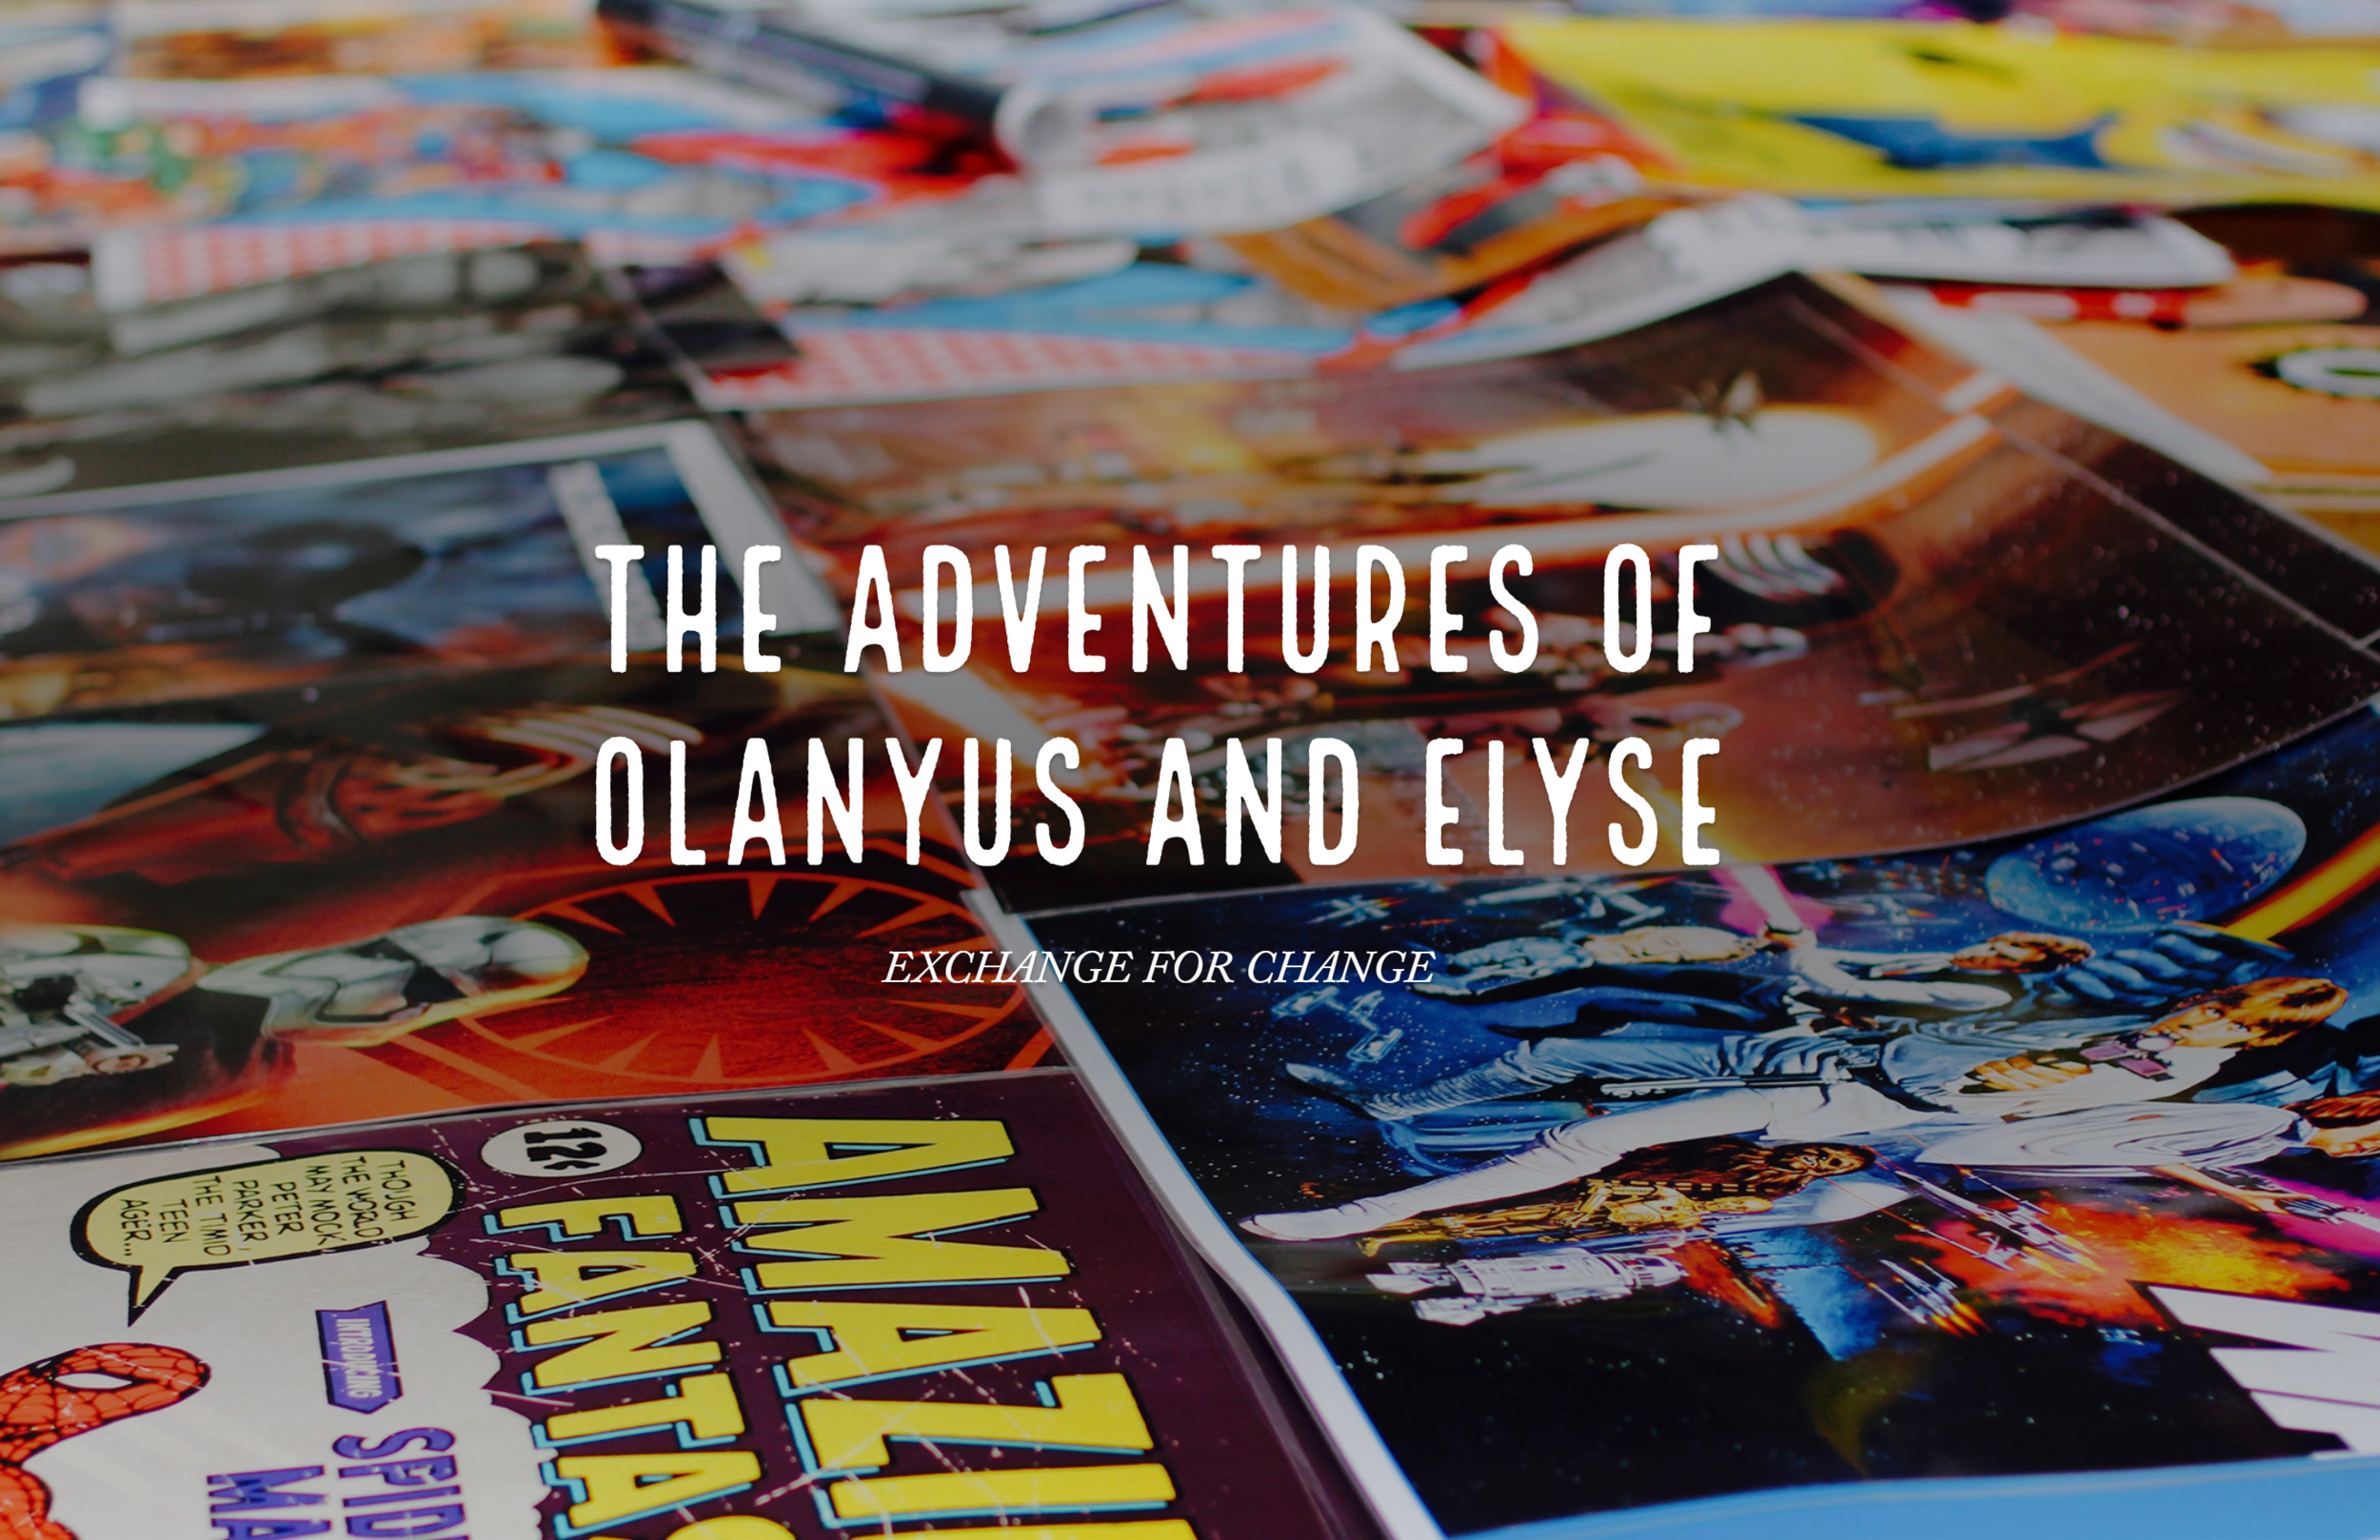 The Adventures of Olanyus and Elyse